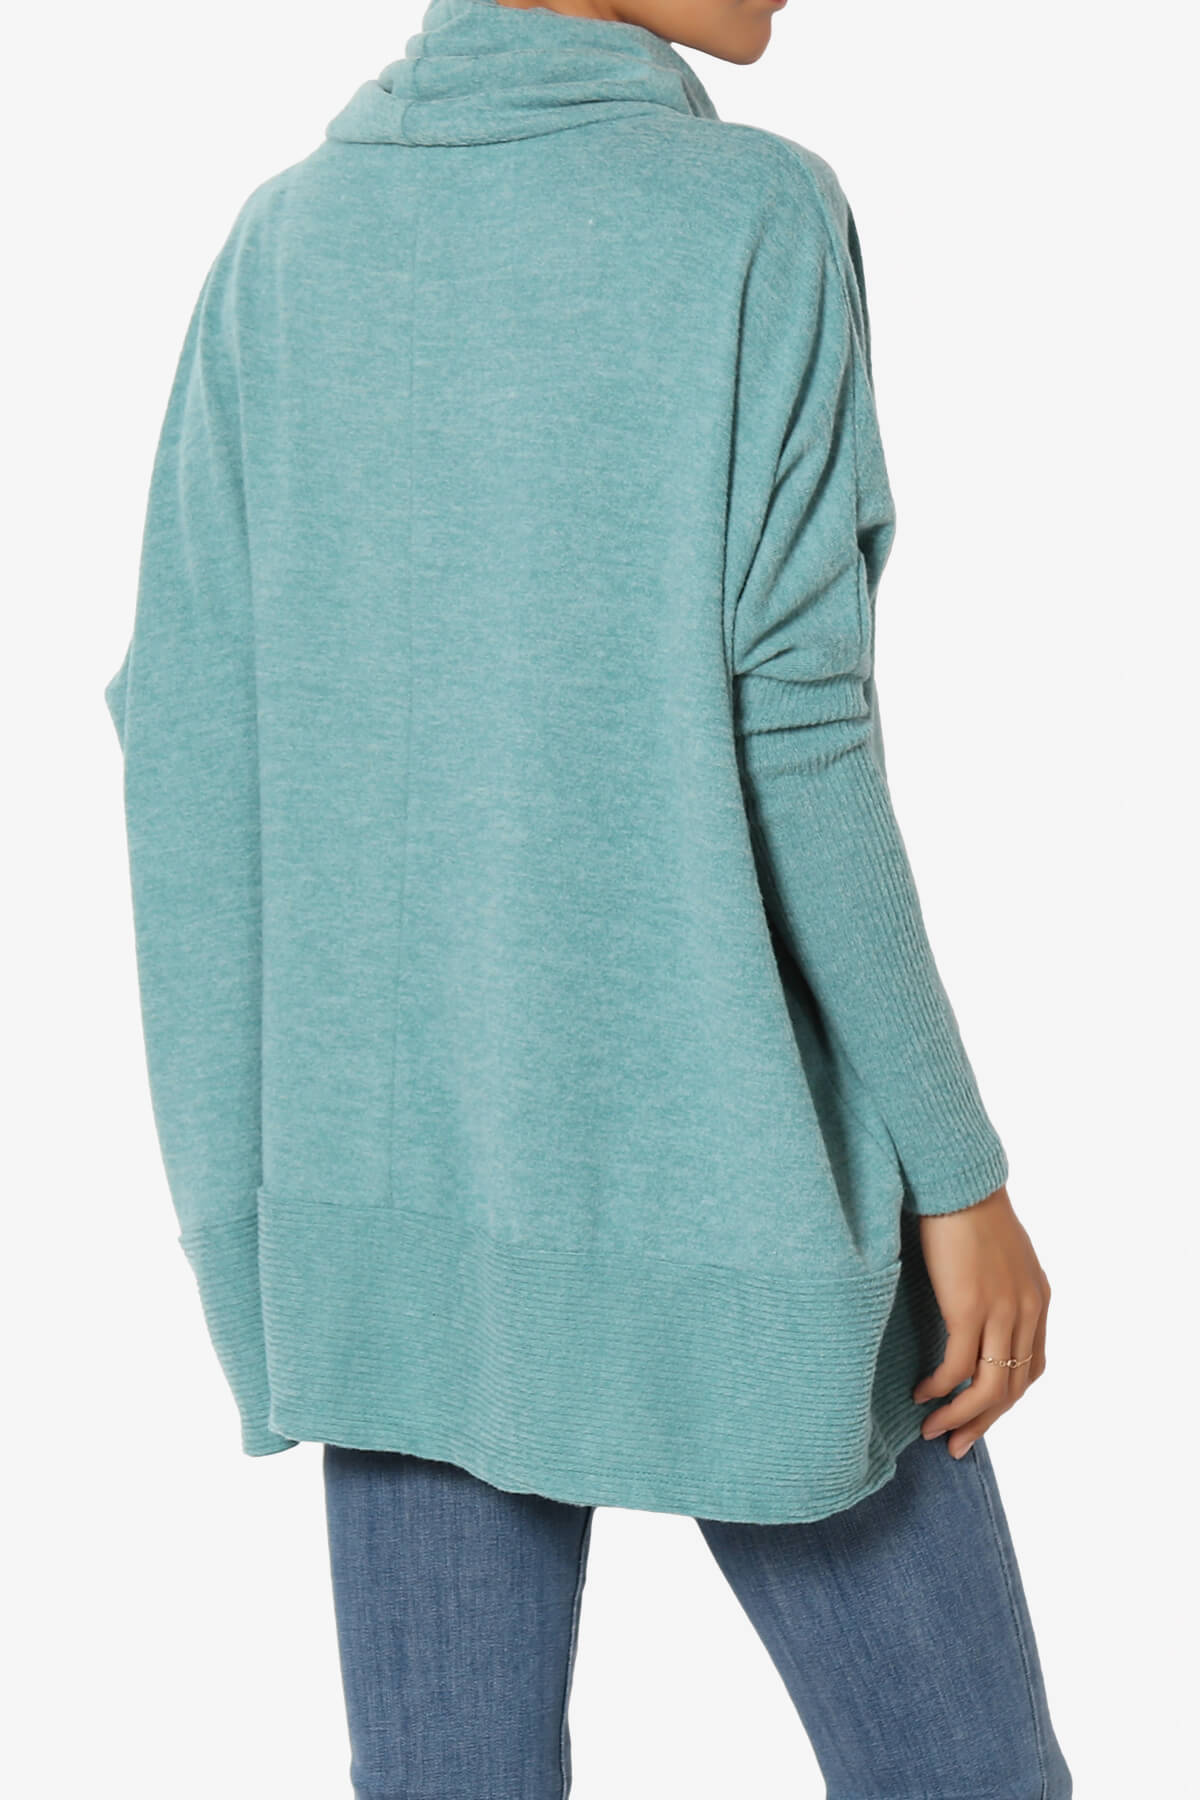 Barclay Cowl Neck Melange Knit Oversized Sweater DUSTY TEAL_4